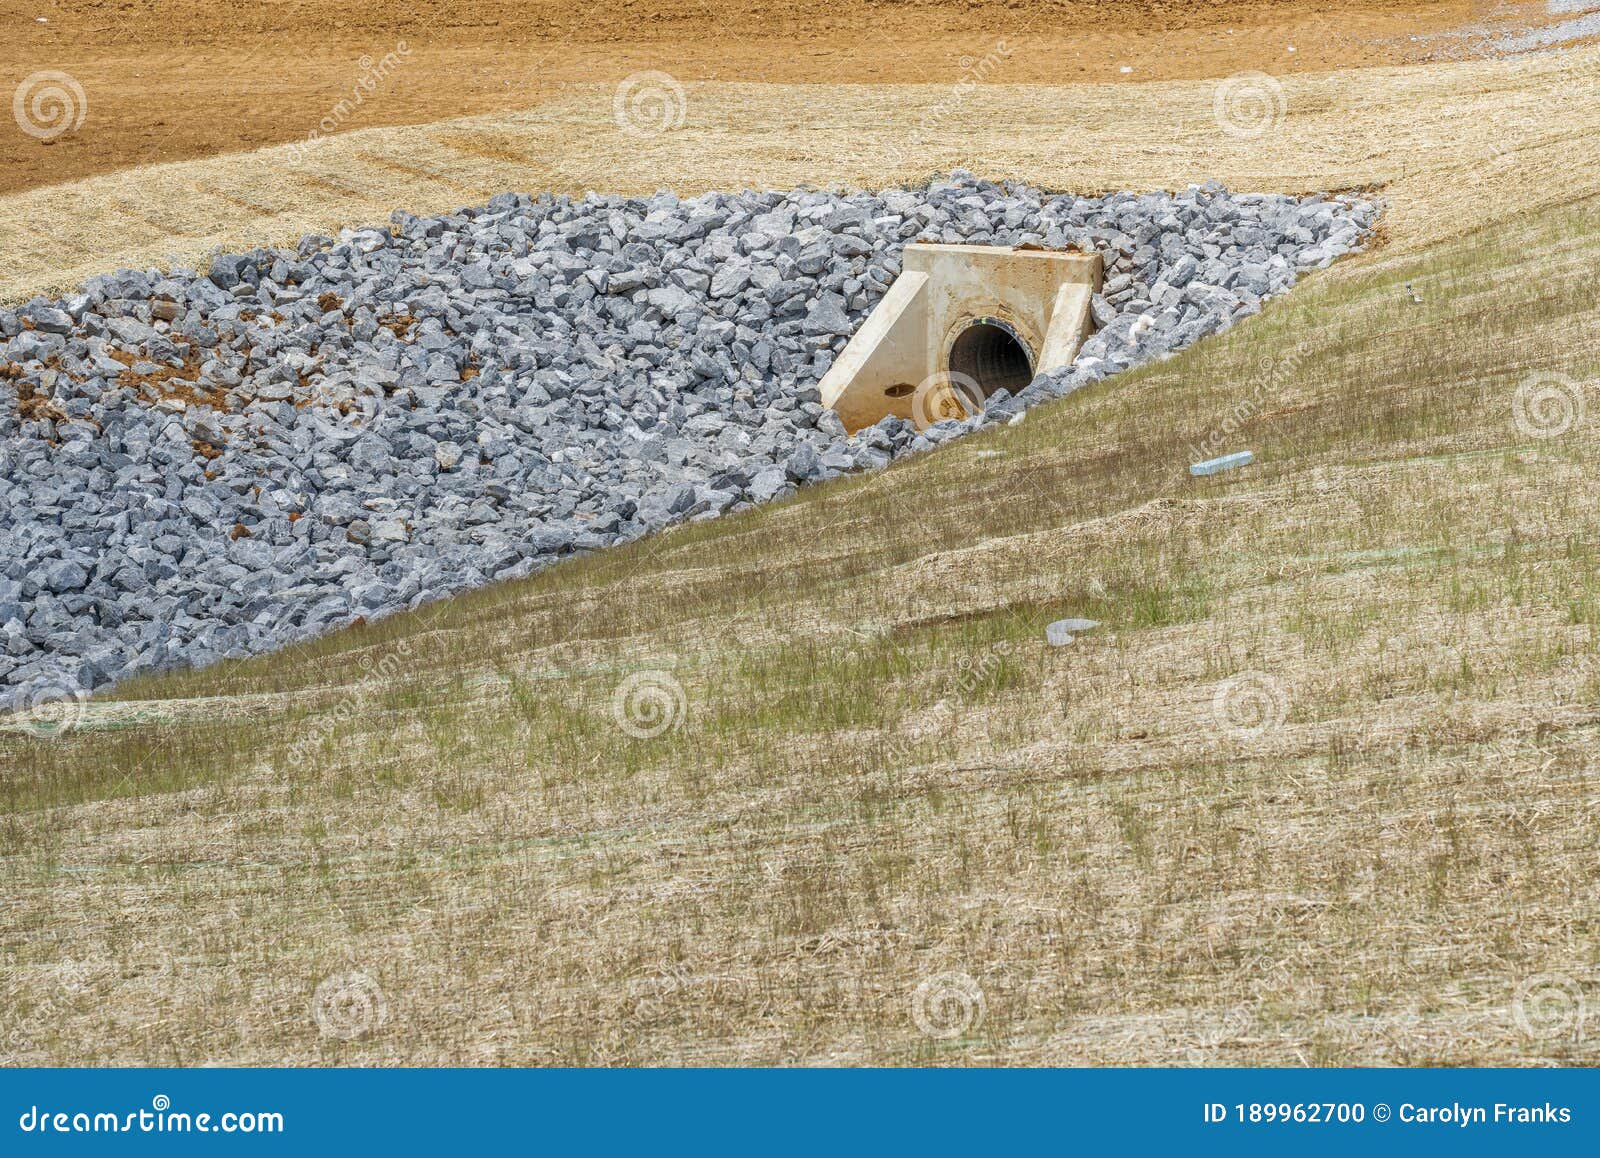 culvert and drainage ditch under construction